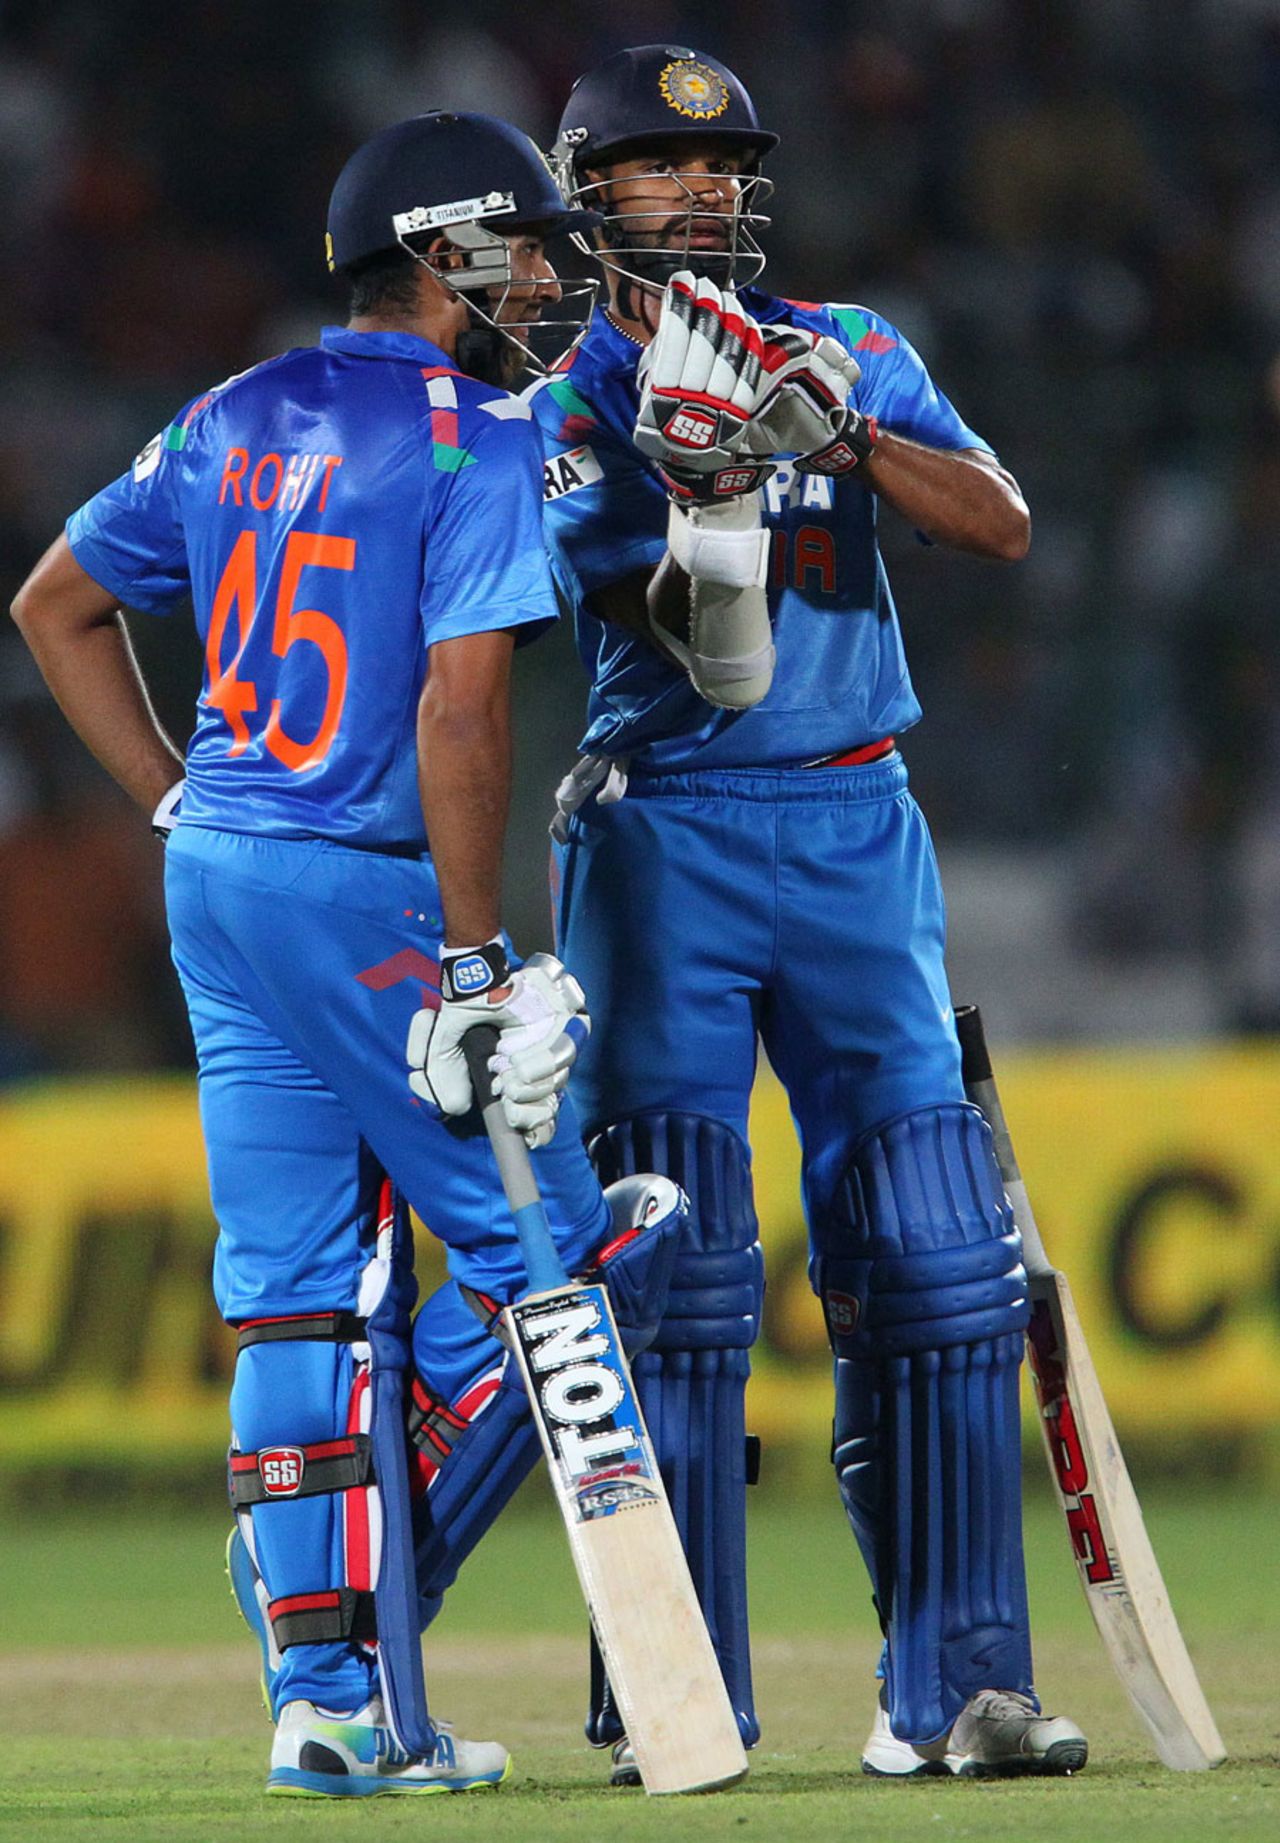 Rohit Sharma and Shikhar Dhawan shared a solid opening stand, India v Australia, 2nd ODI, Jaipur, October 16, 2013